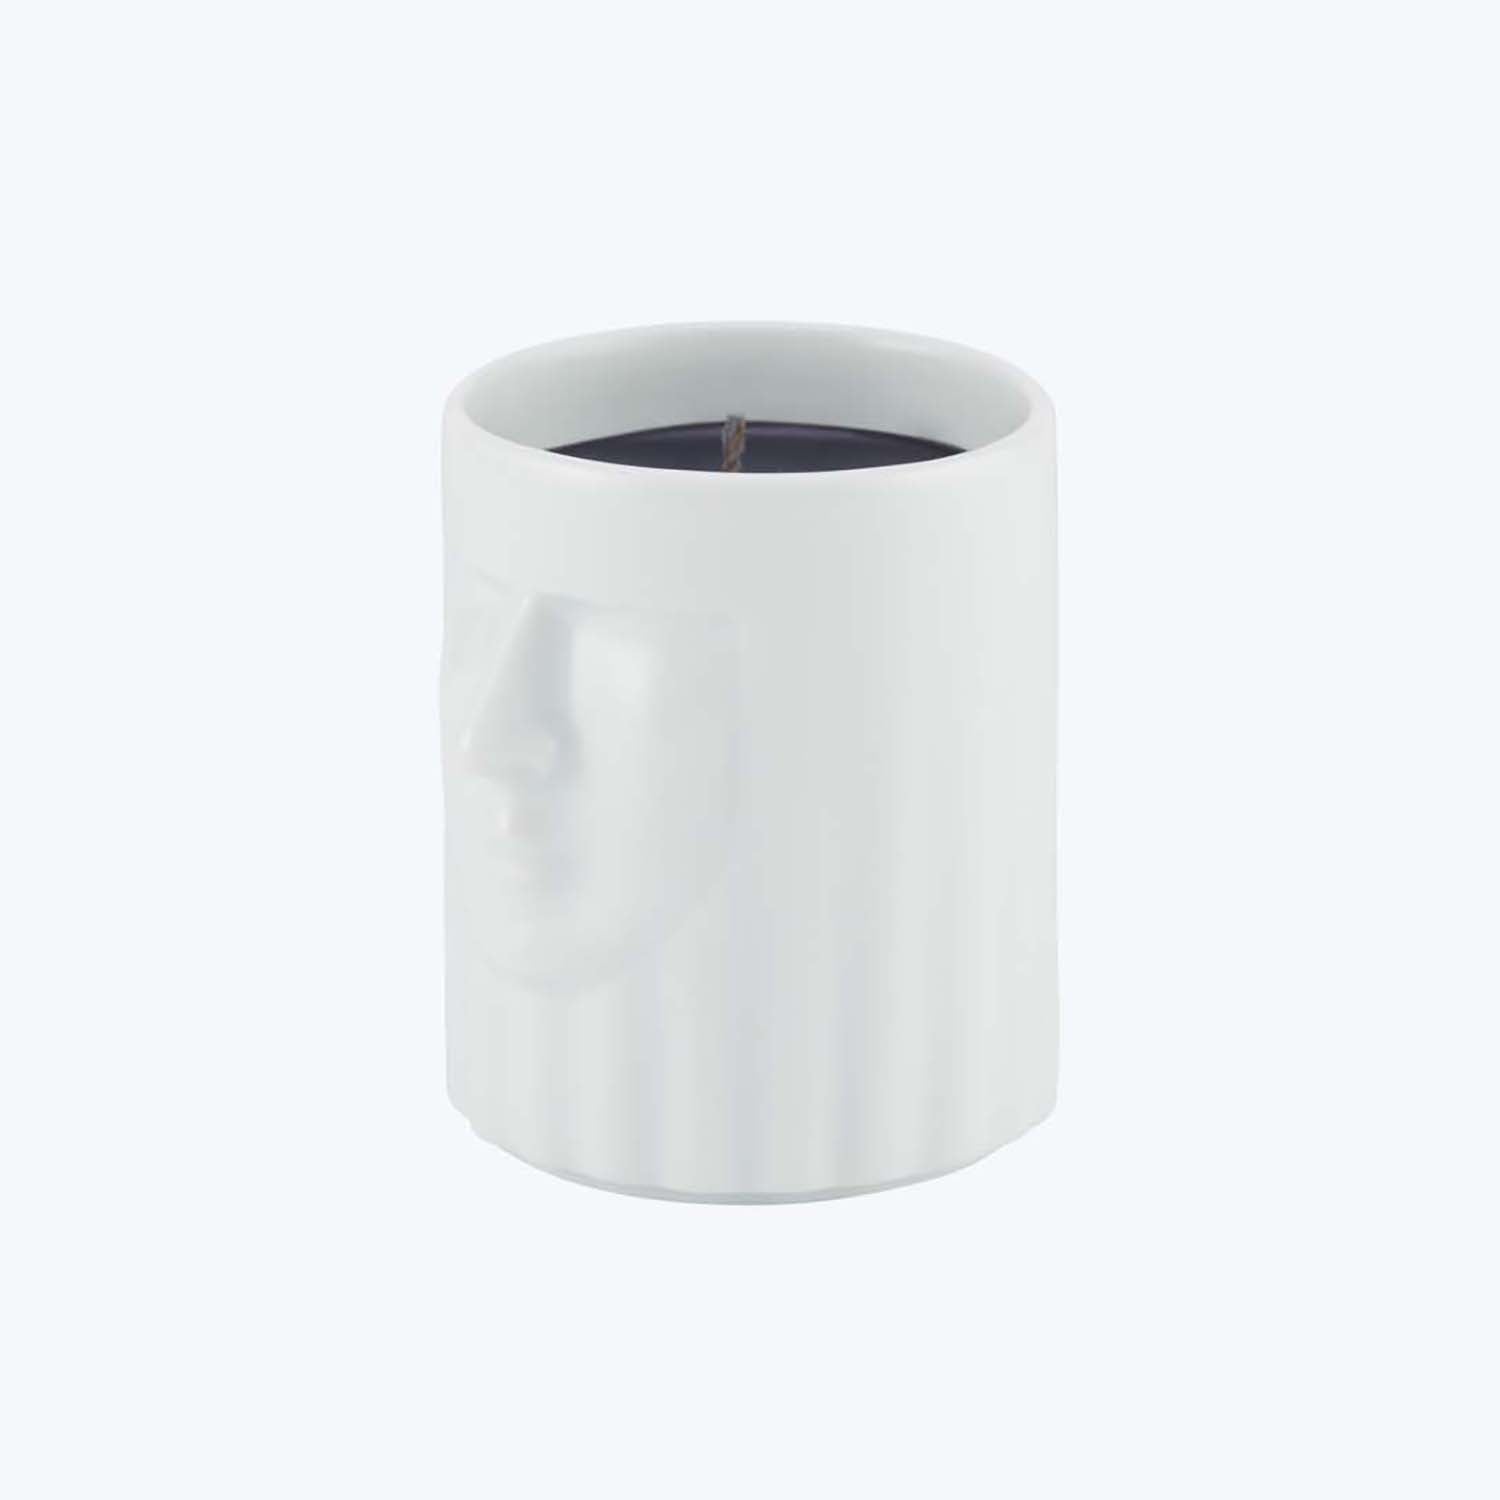 Unique white candle holder features sculptural face and contrasting wax.